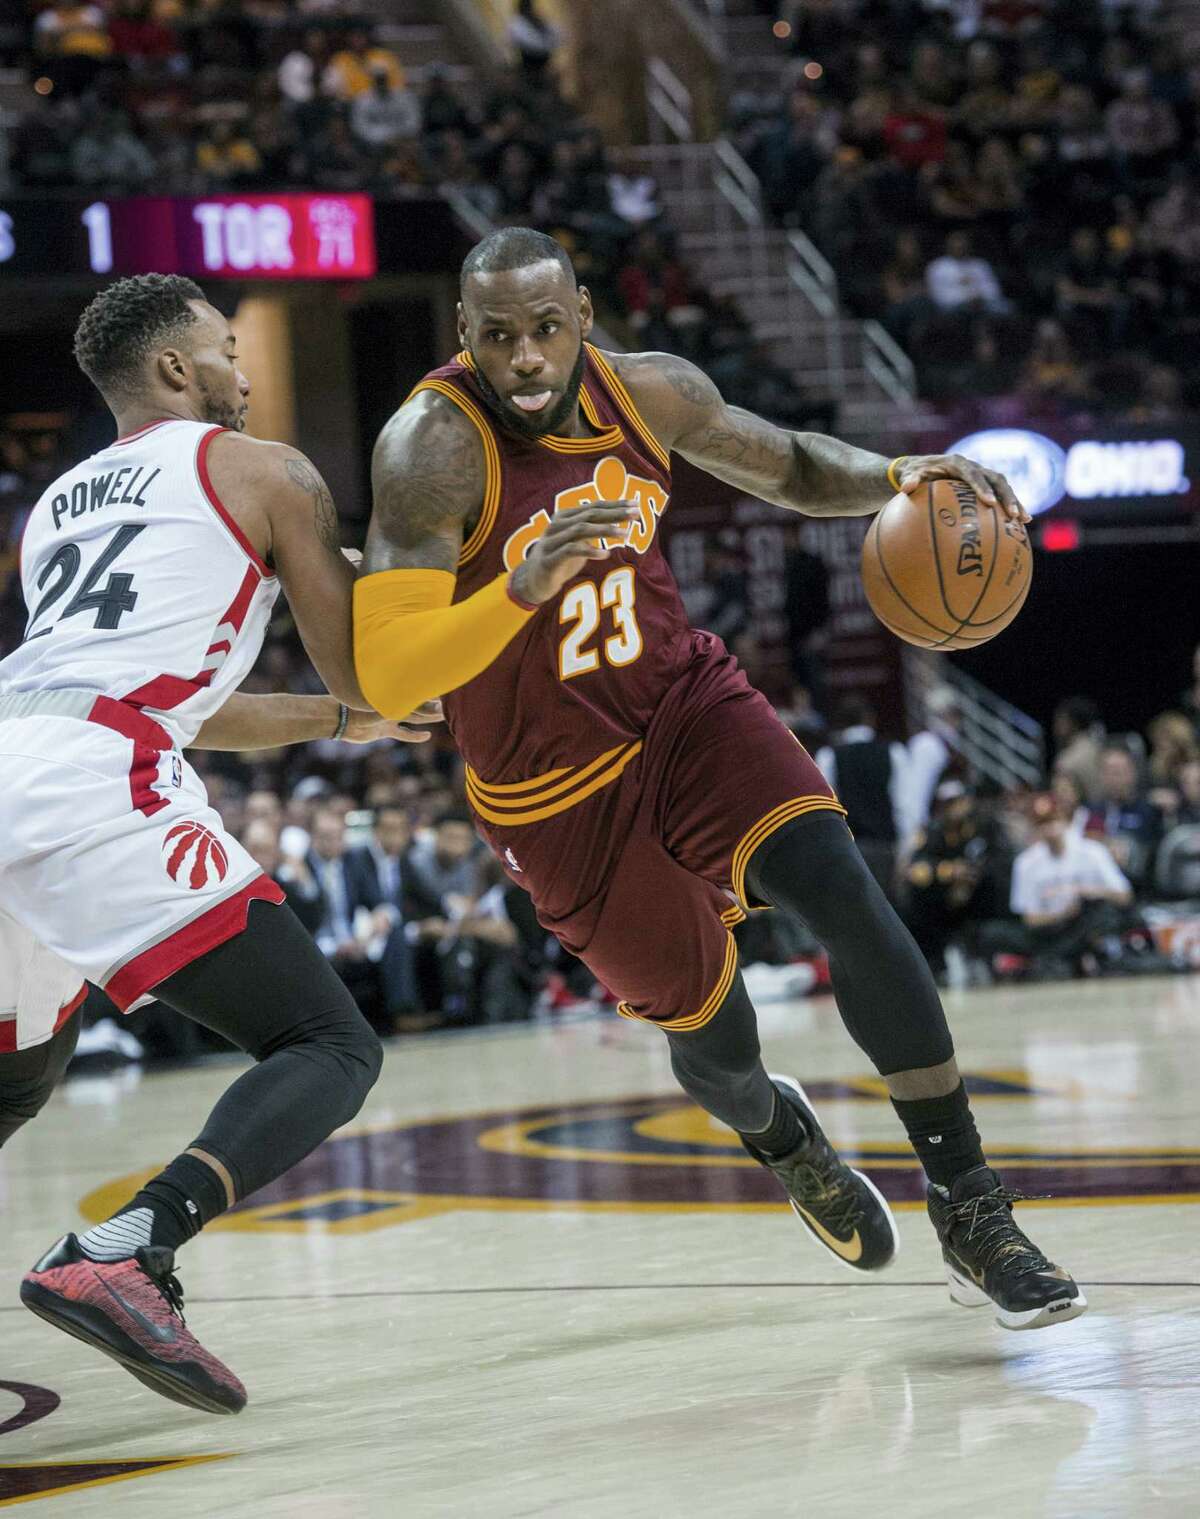 Cleveland Cavaliers’ LeBron James (23) drives past Toronto Raptors’ Norman Powell (24) during the first half of an NBA basketball game in Cleveland Tuesday, Nov. 15, 2016.